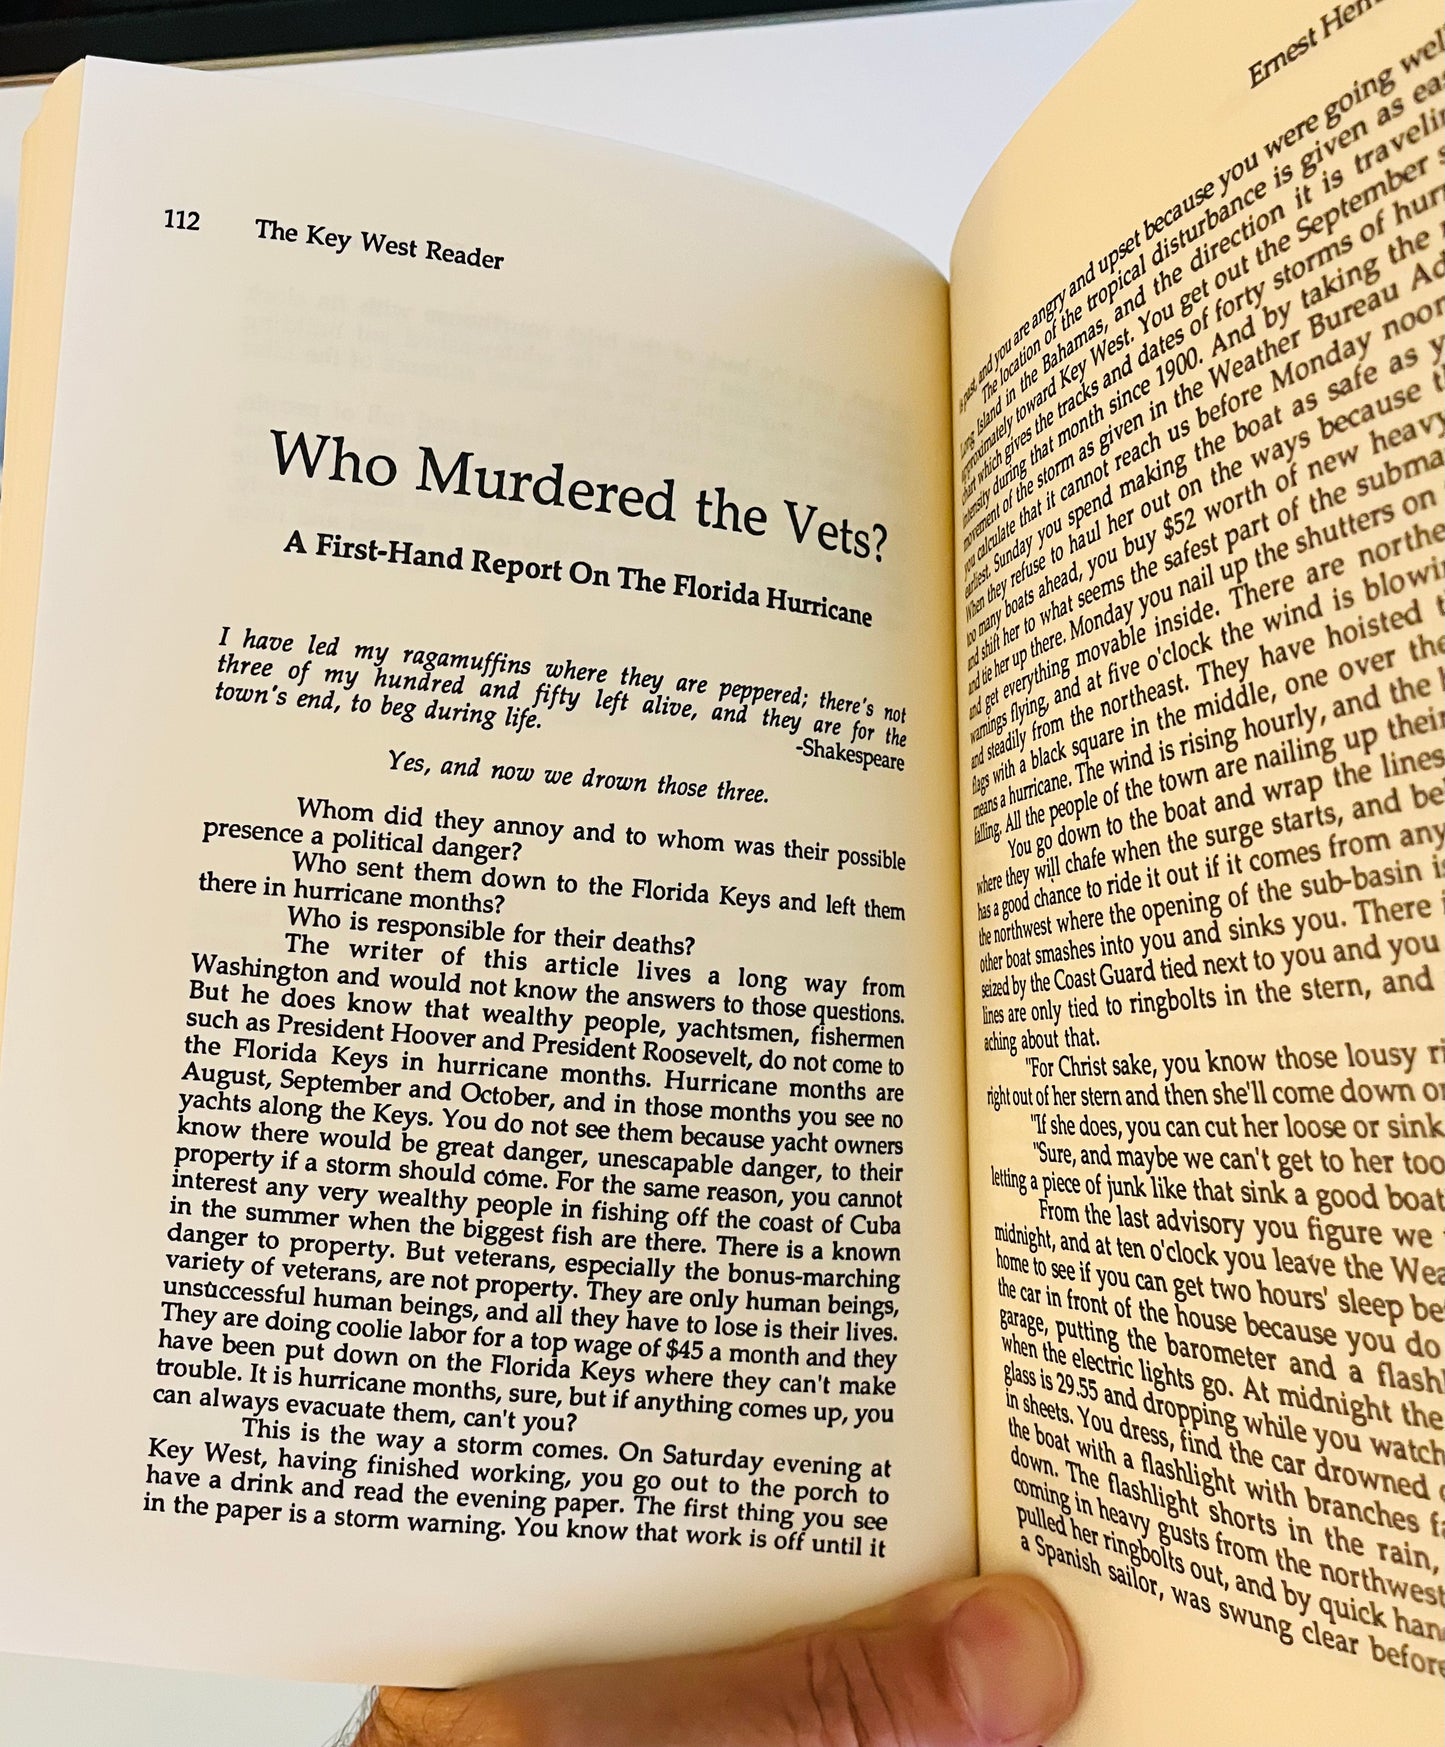 The Key West Reader: The Best of Key West's Writers 1830-1990